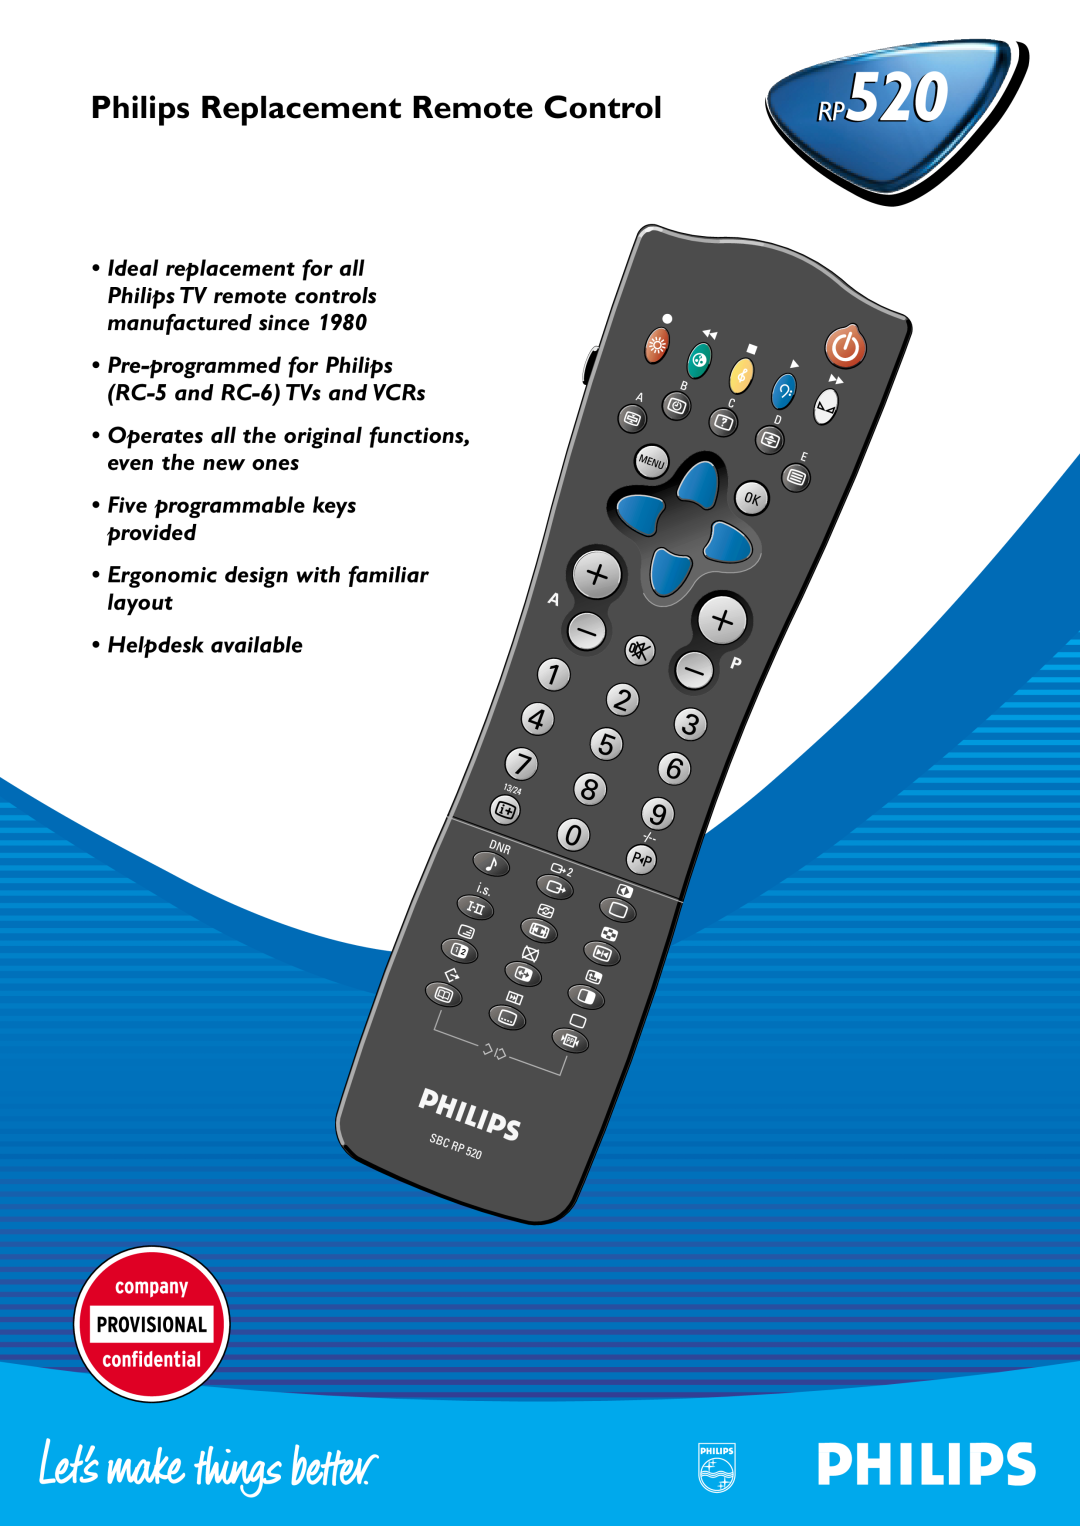 Philips RP520 manual Philips Replacement Remote Control, manufactured since, Helpdesk available 